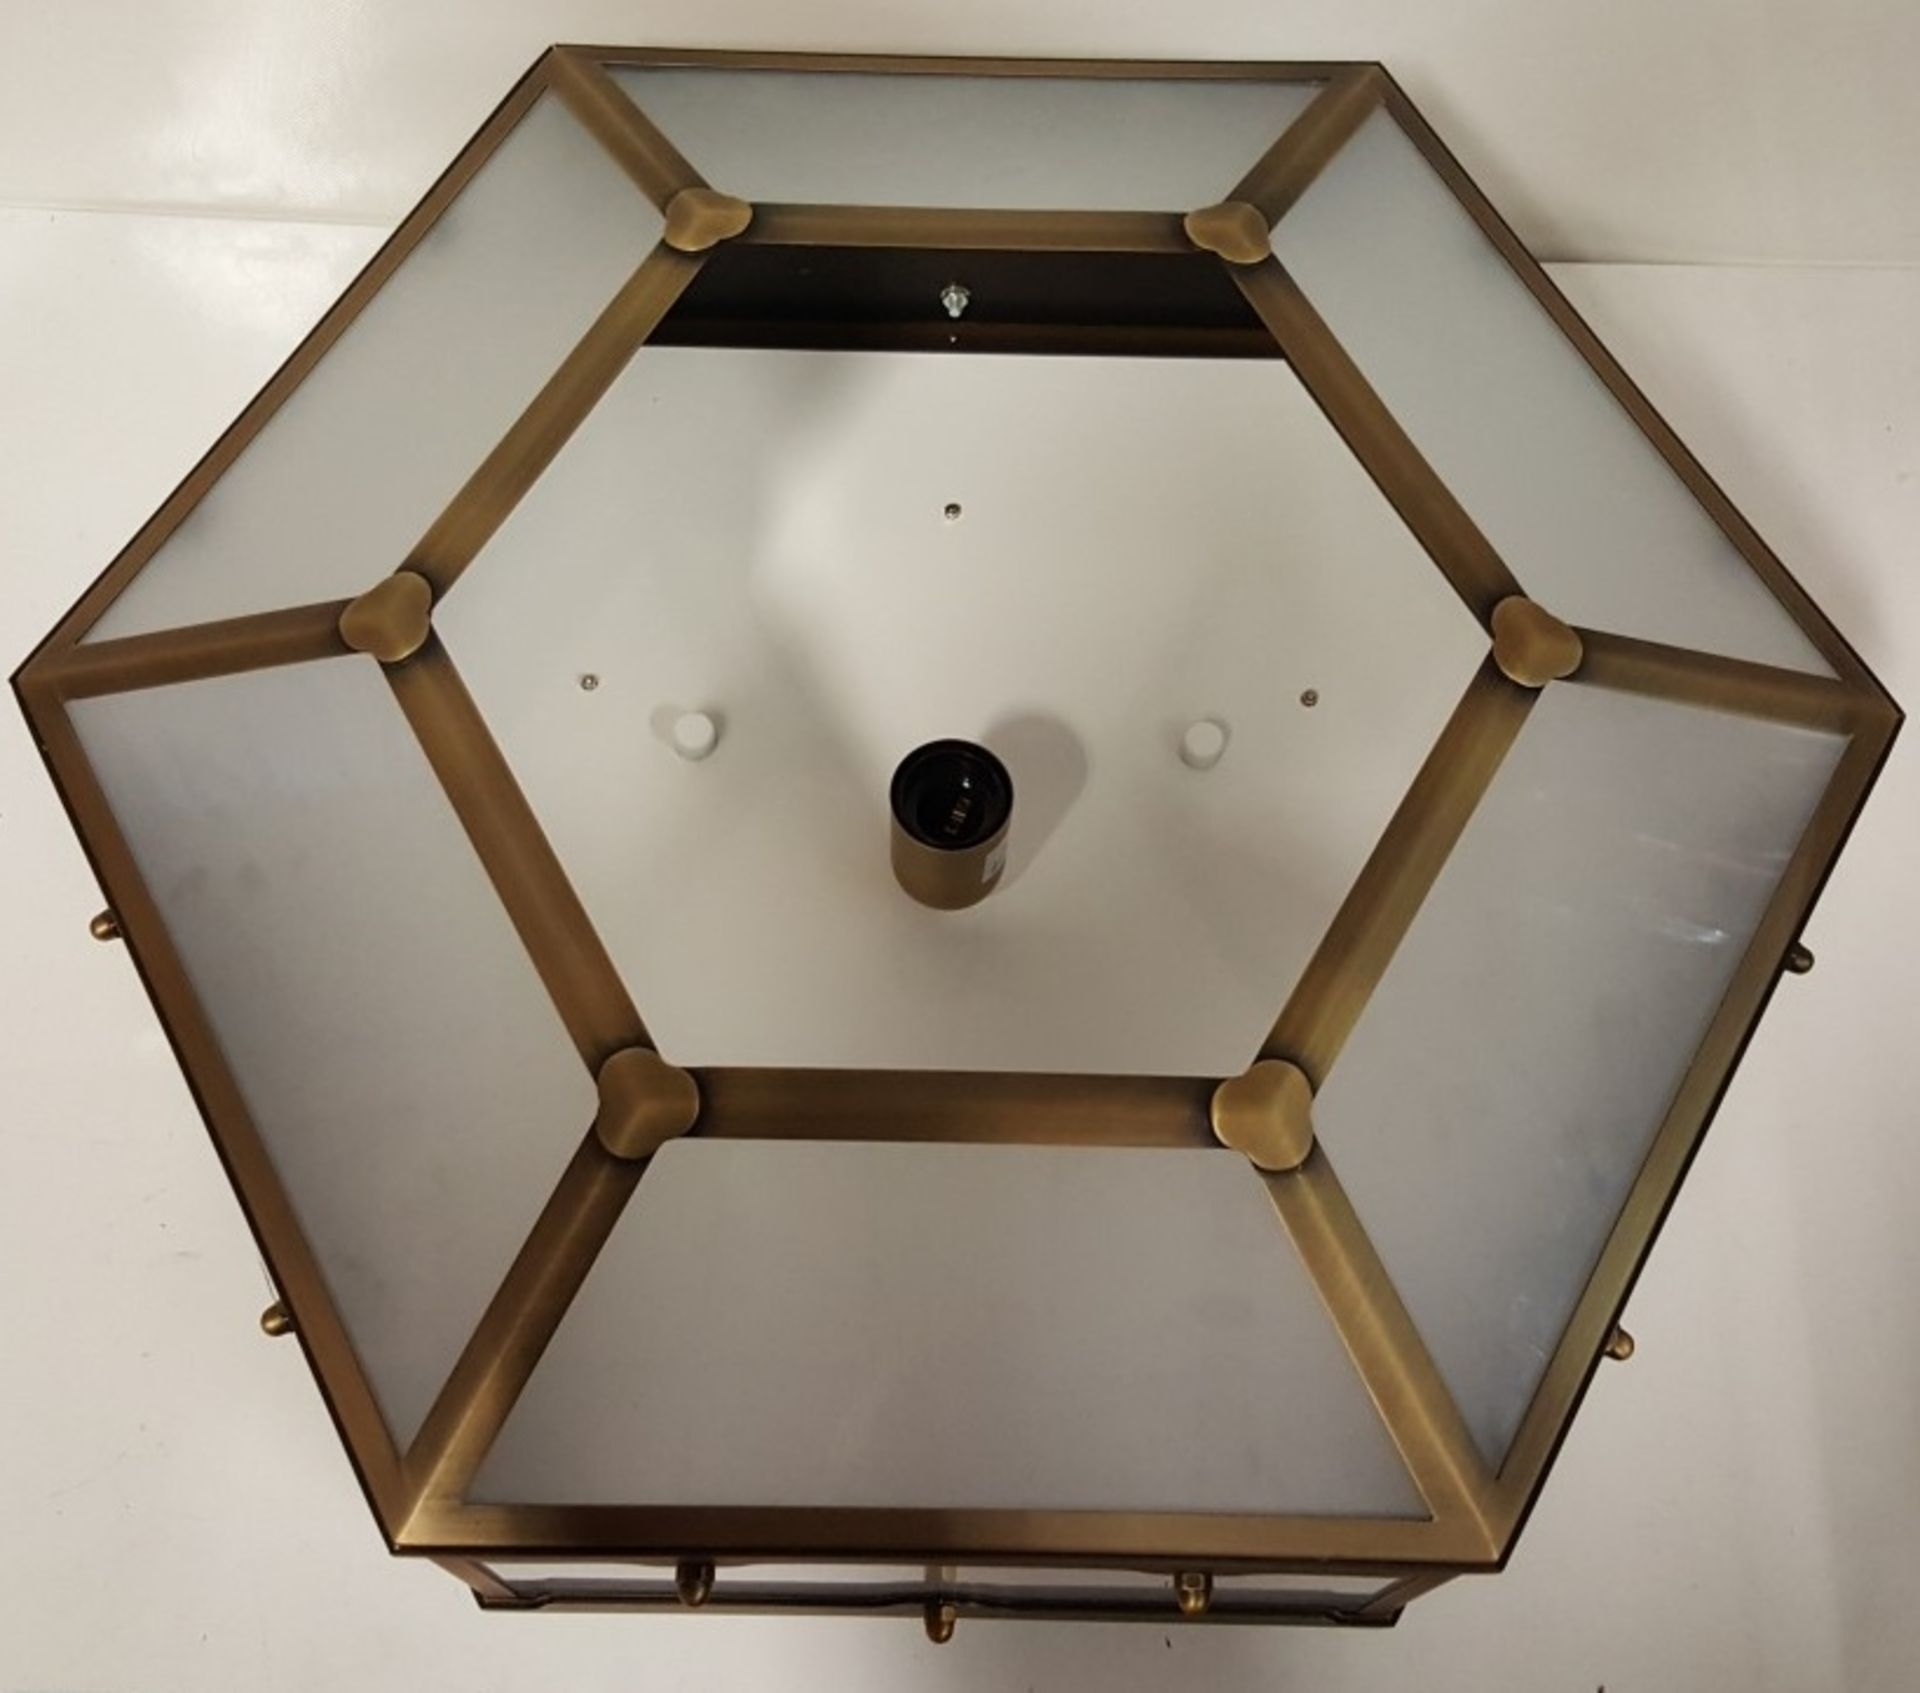 1 x Chelsom Flush Fitting Hexagonal Shaped Light Fitting In A Antique Brass Finish - REF:J2354 - Image 3 of 8